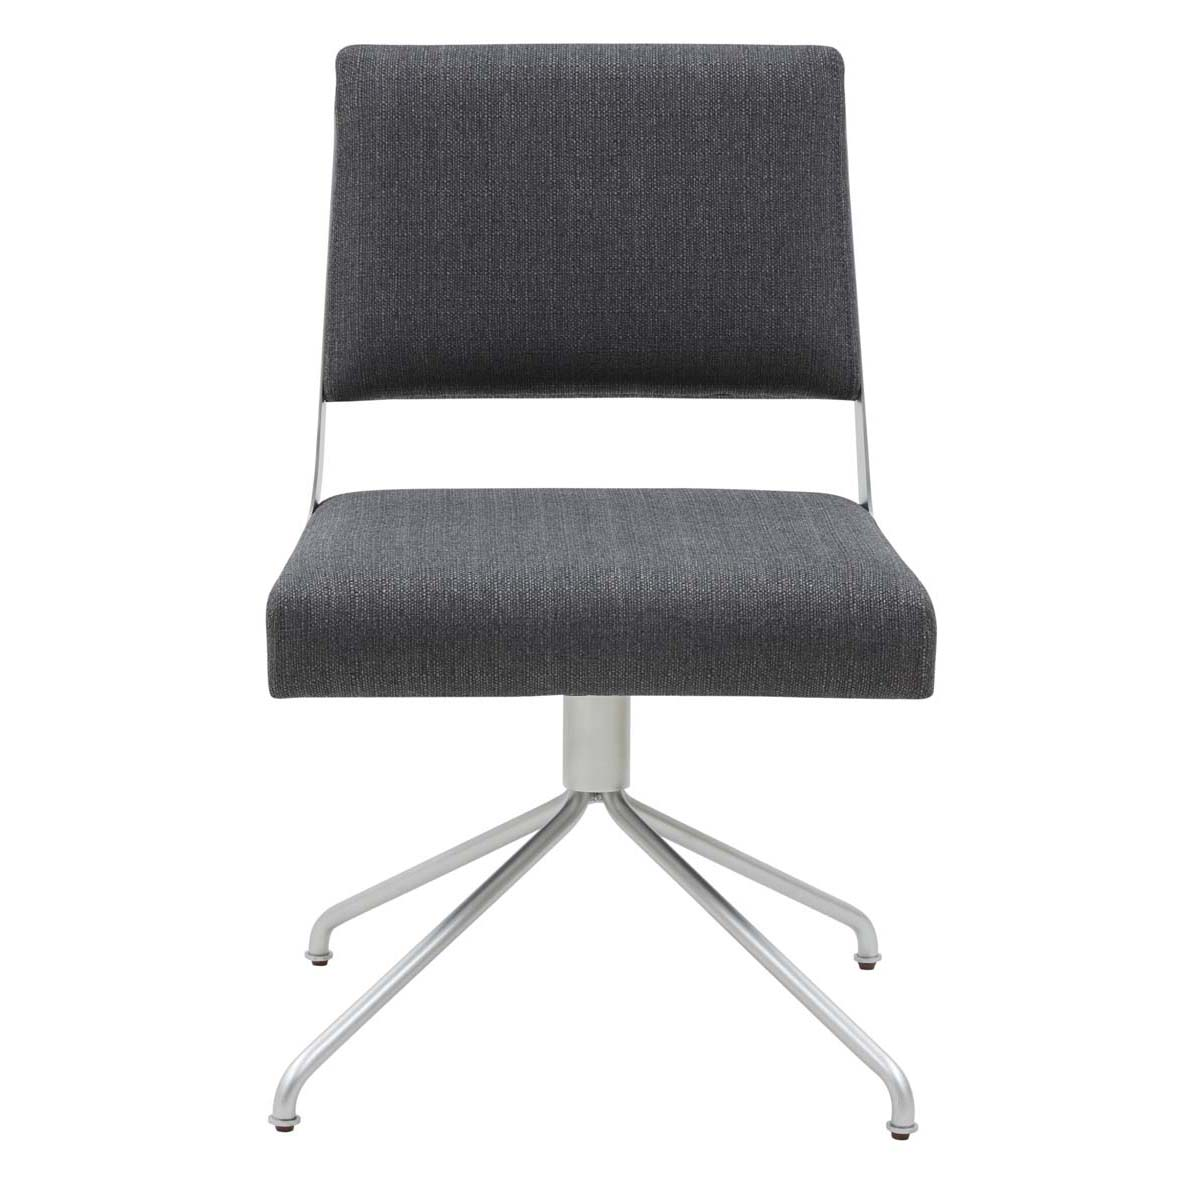 Safavieh Couture Emmeline Swivel Office Chair - Slate Grey / Silver